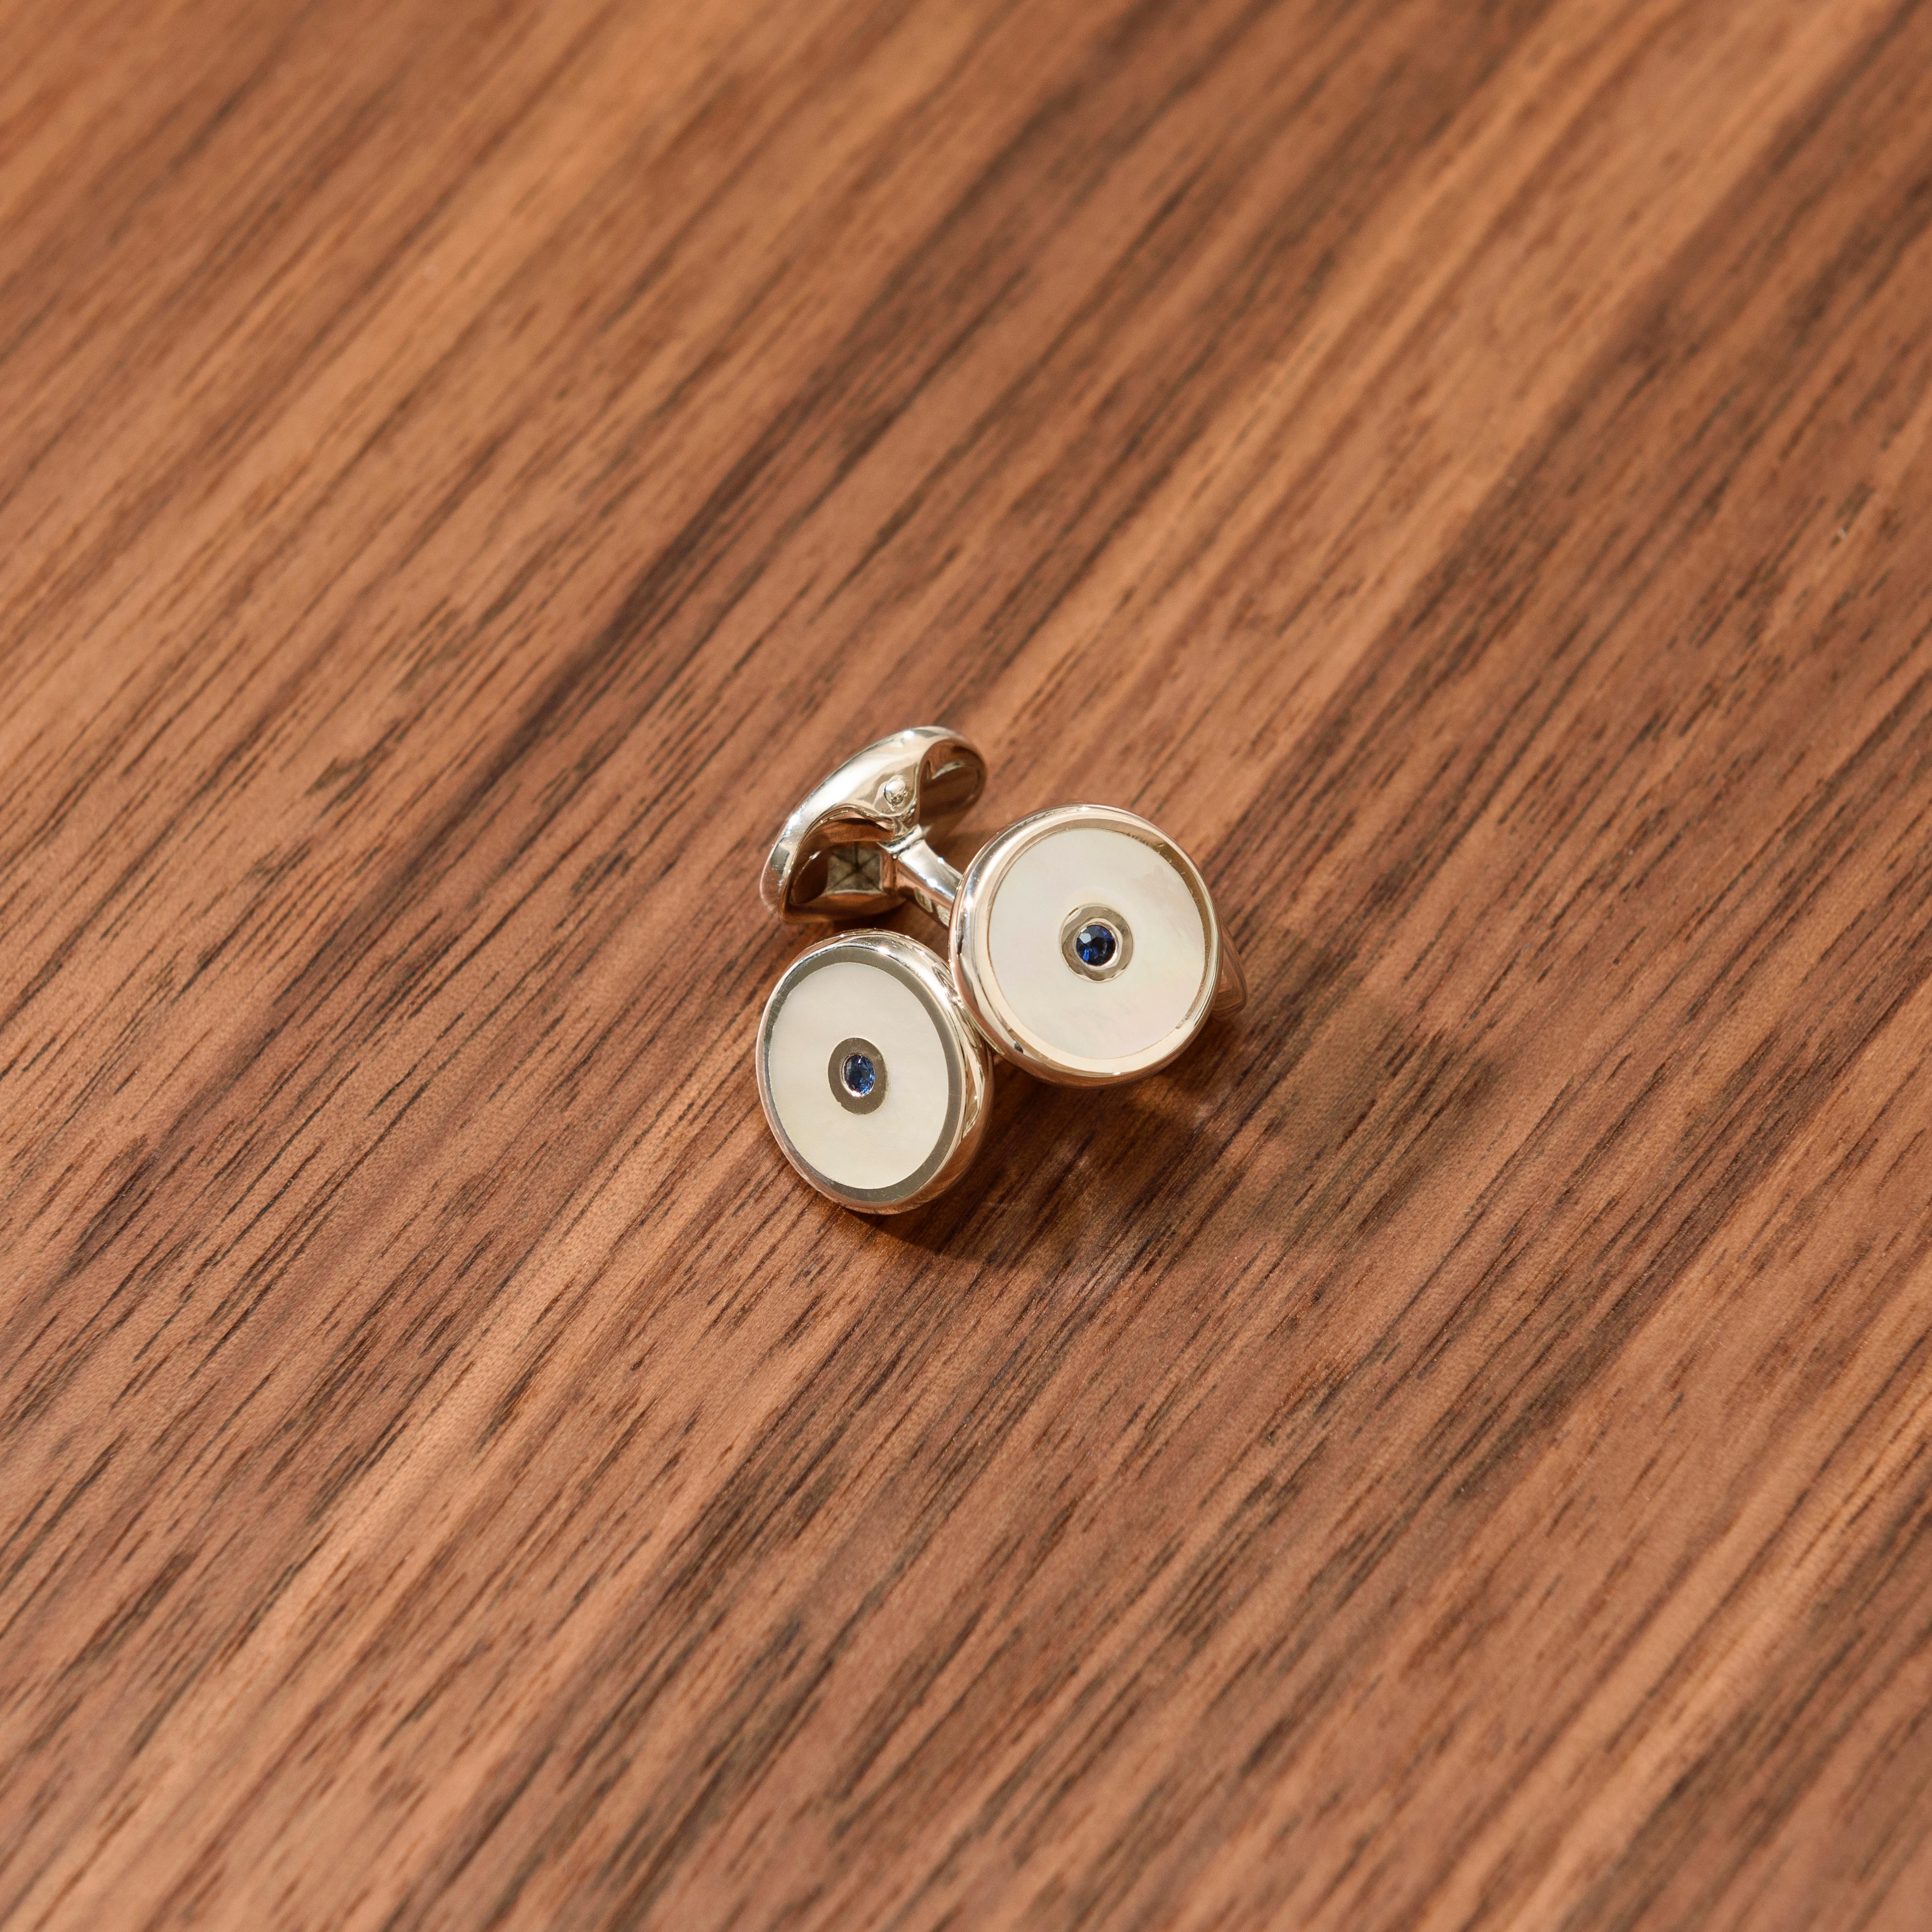 DEAKIN & FRANCIS, Piccadilly Arcade, London

These beautiful round, sterling silver cufflinks contain a beautiful hand-cut mother-of-pearl inlay with striking sapphire blue stone centre and spring link fitting.

The perfect finishing touch to any